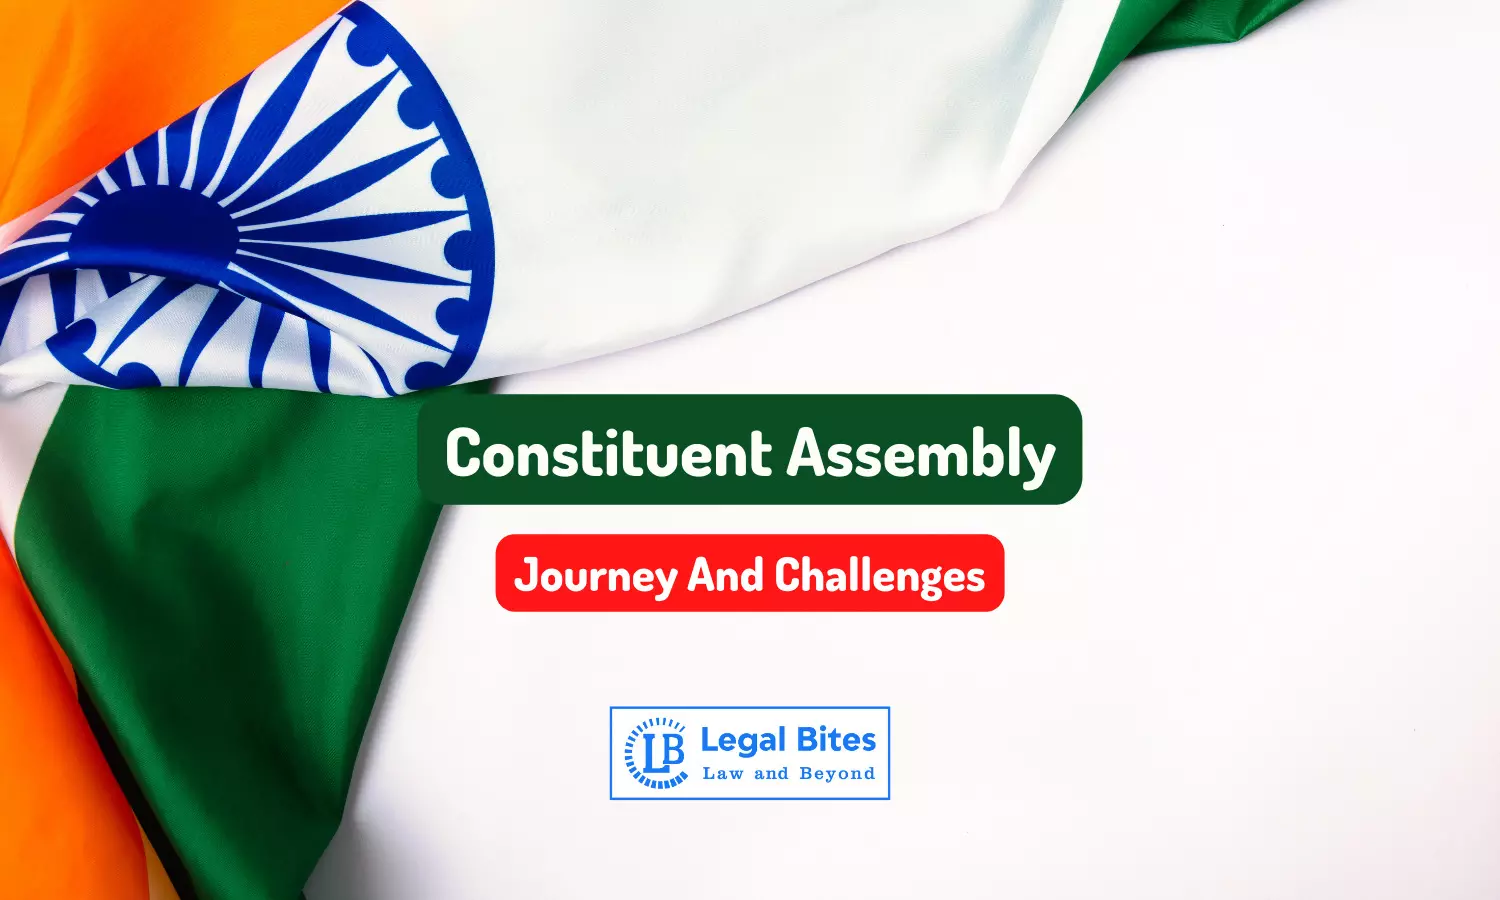 Constituent Assembly - Journey And Challenges